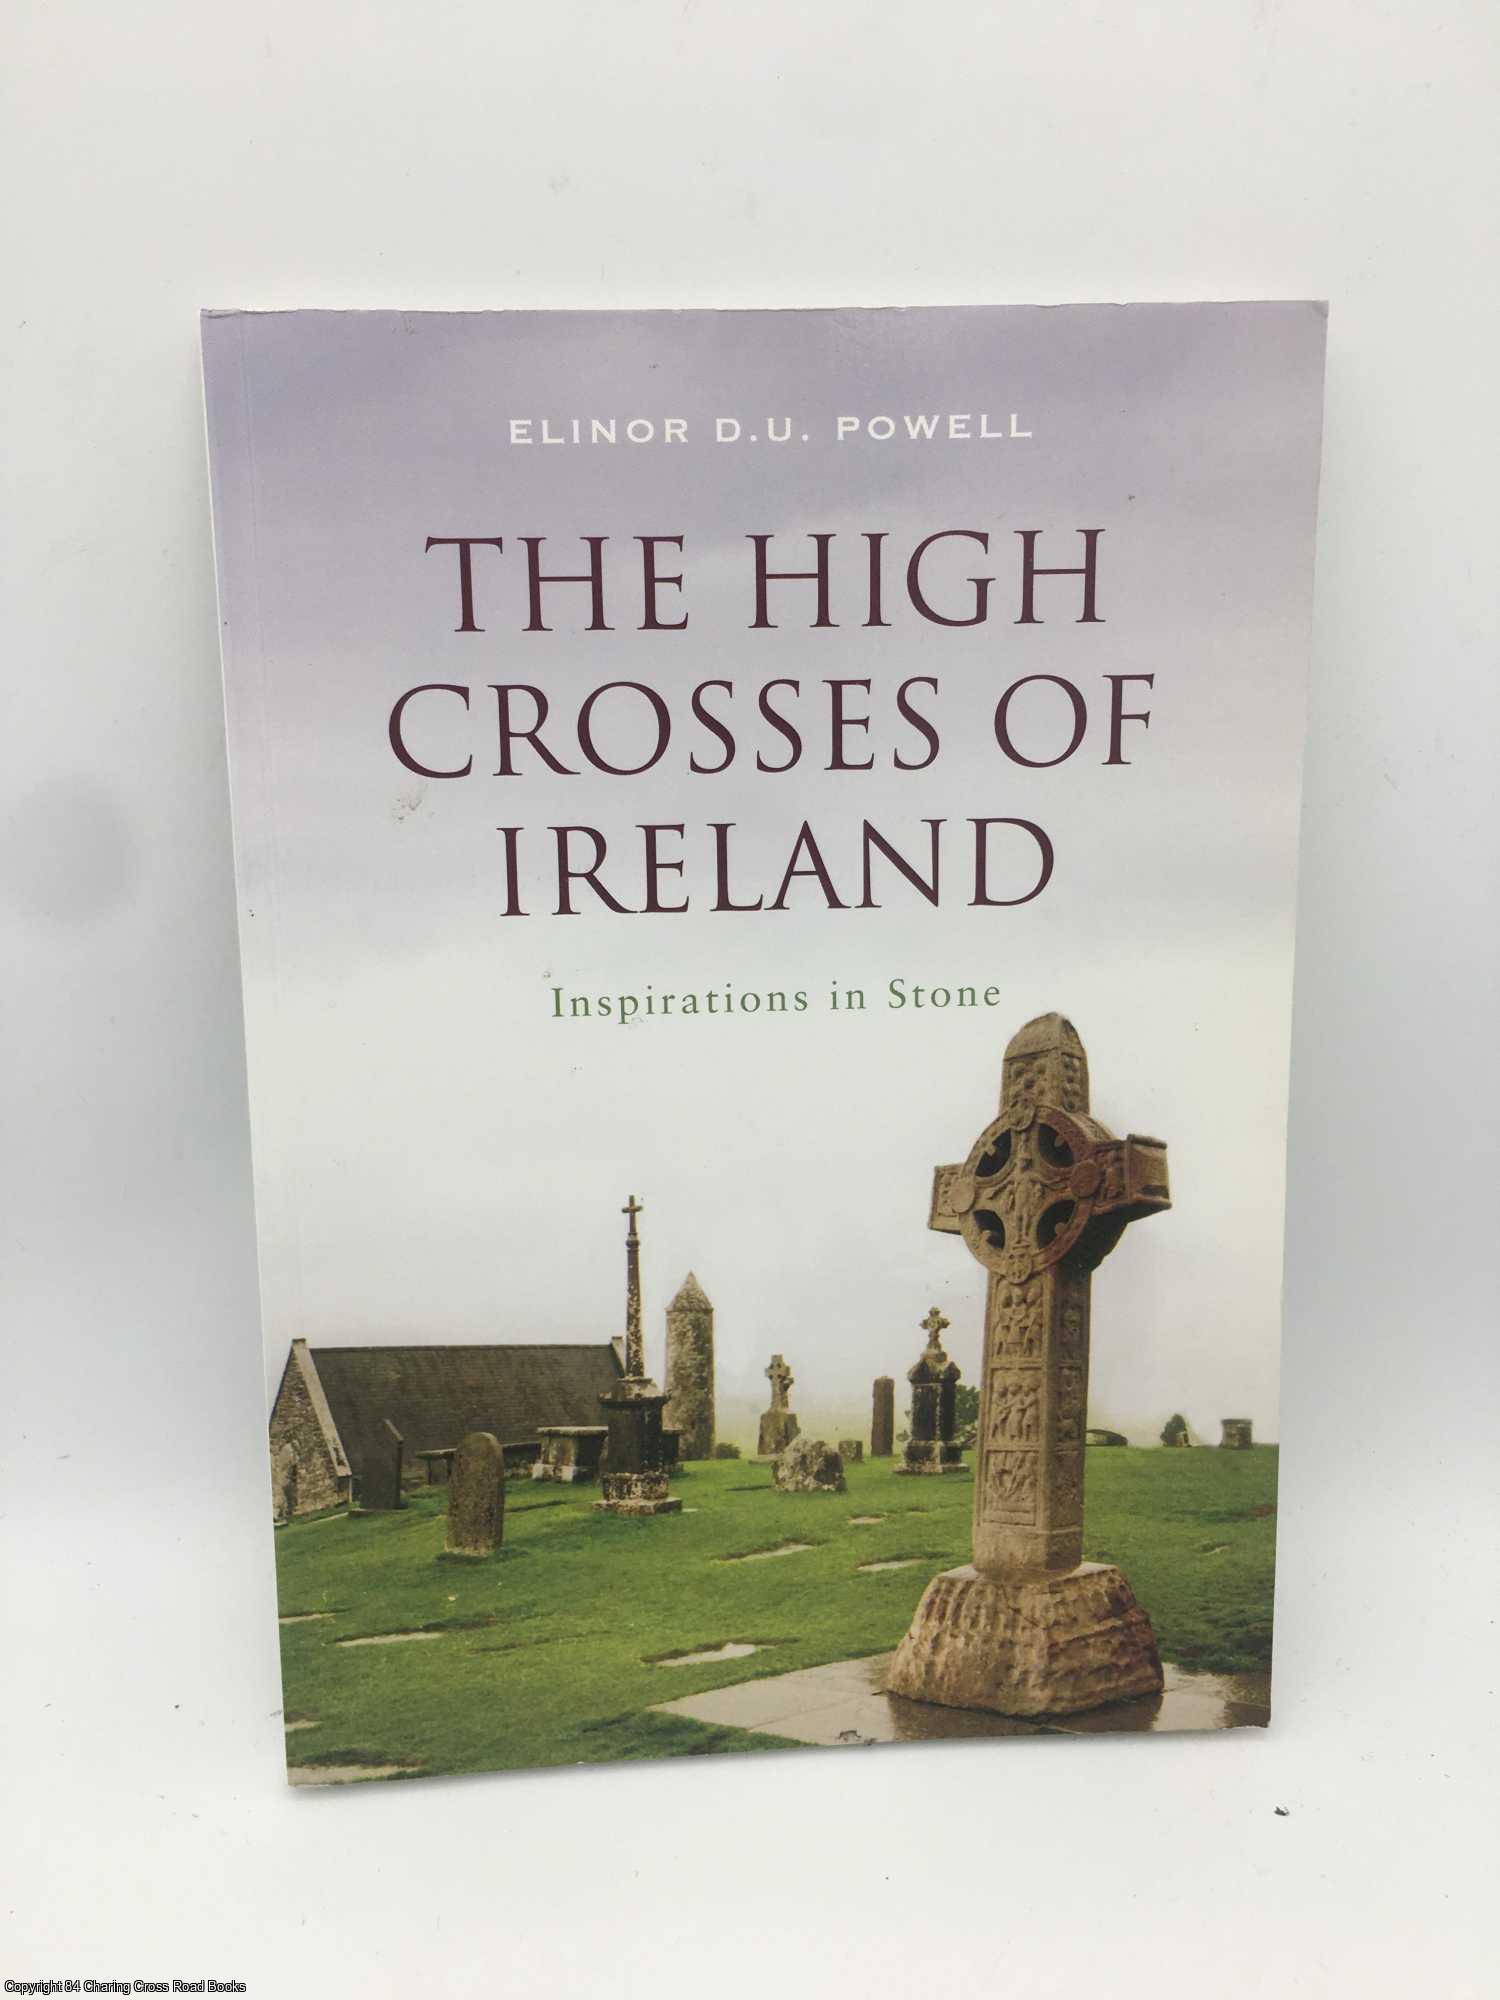 Powell, Elinor - The High Crosses of Ireland: Inspirations in Stone